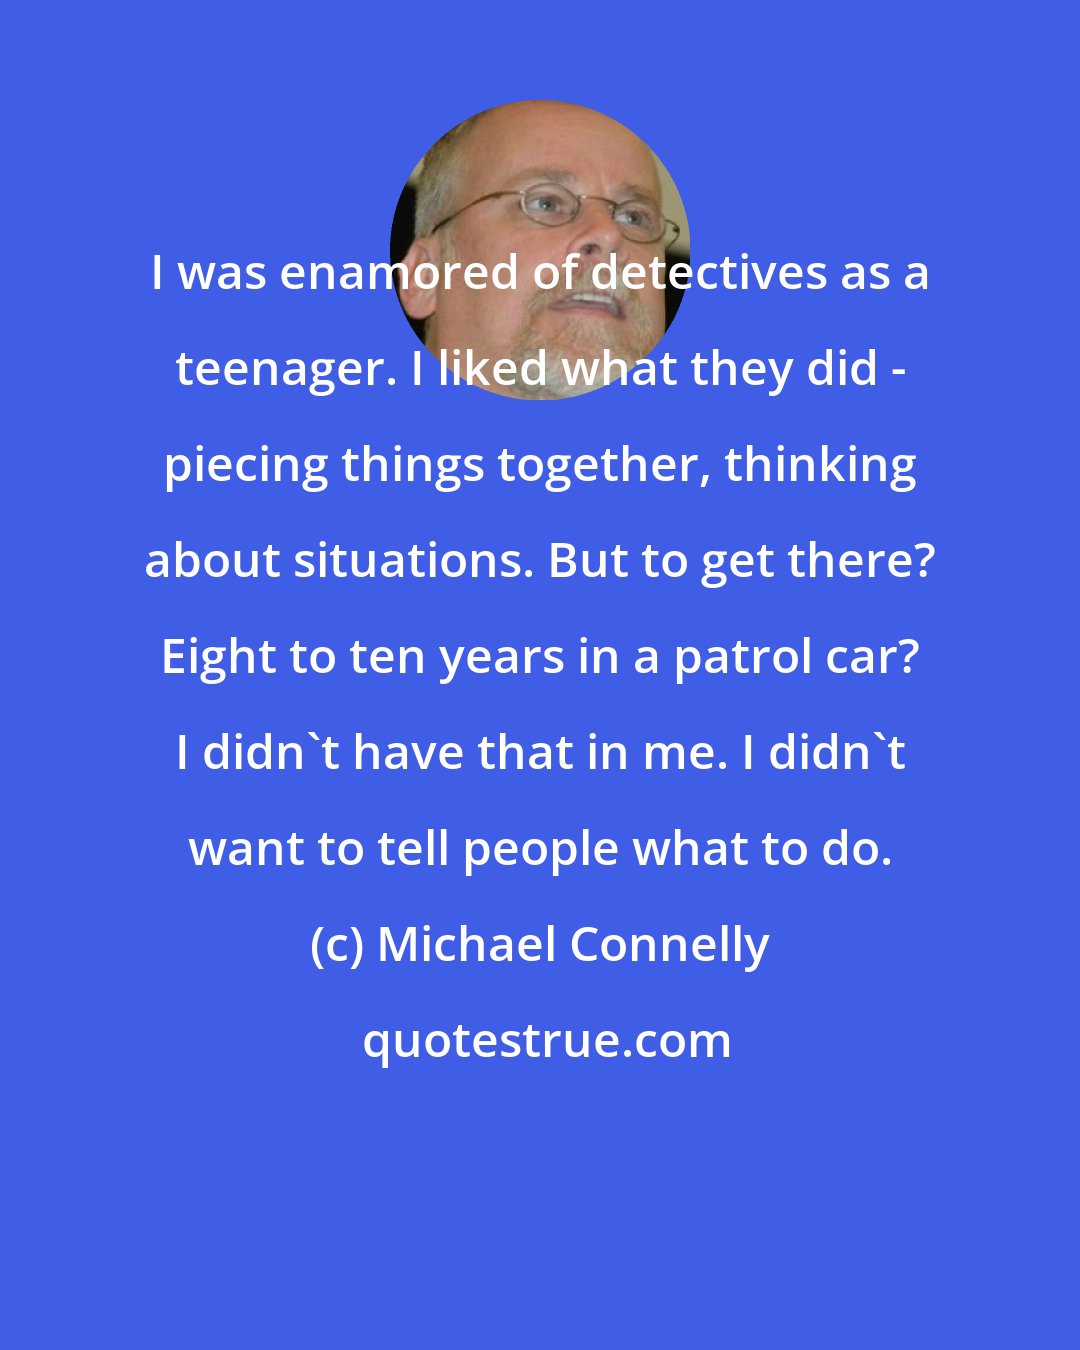 Michael Connelly: I was enamored of detectives as a teenager. I liked what they did - piecing things together, thinking about situations. But to get there? Eight to ten years in a patrol car? I didn't have that in me. I didn't want to tell people what to do.